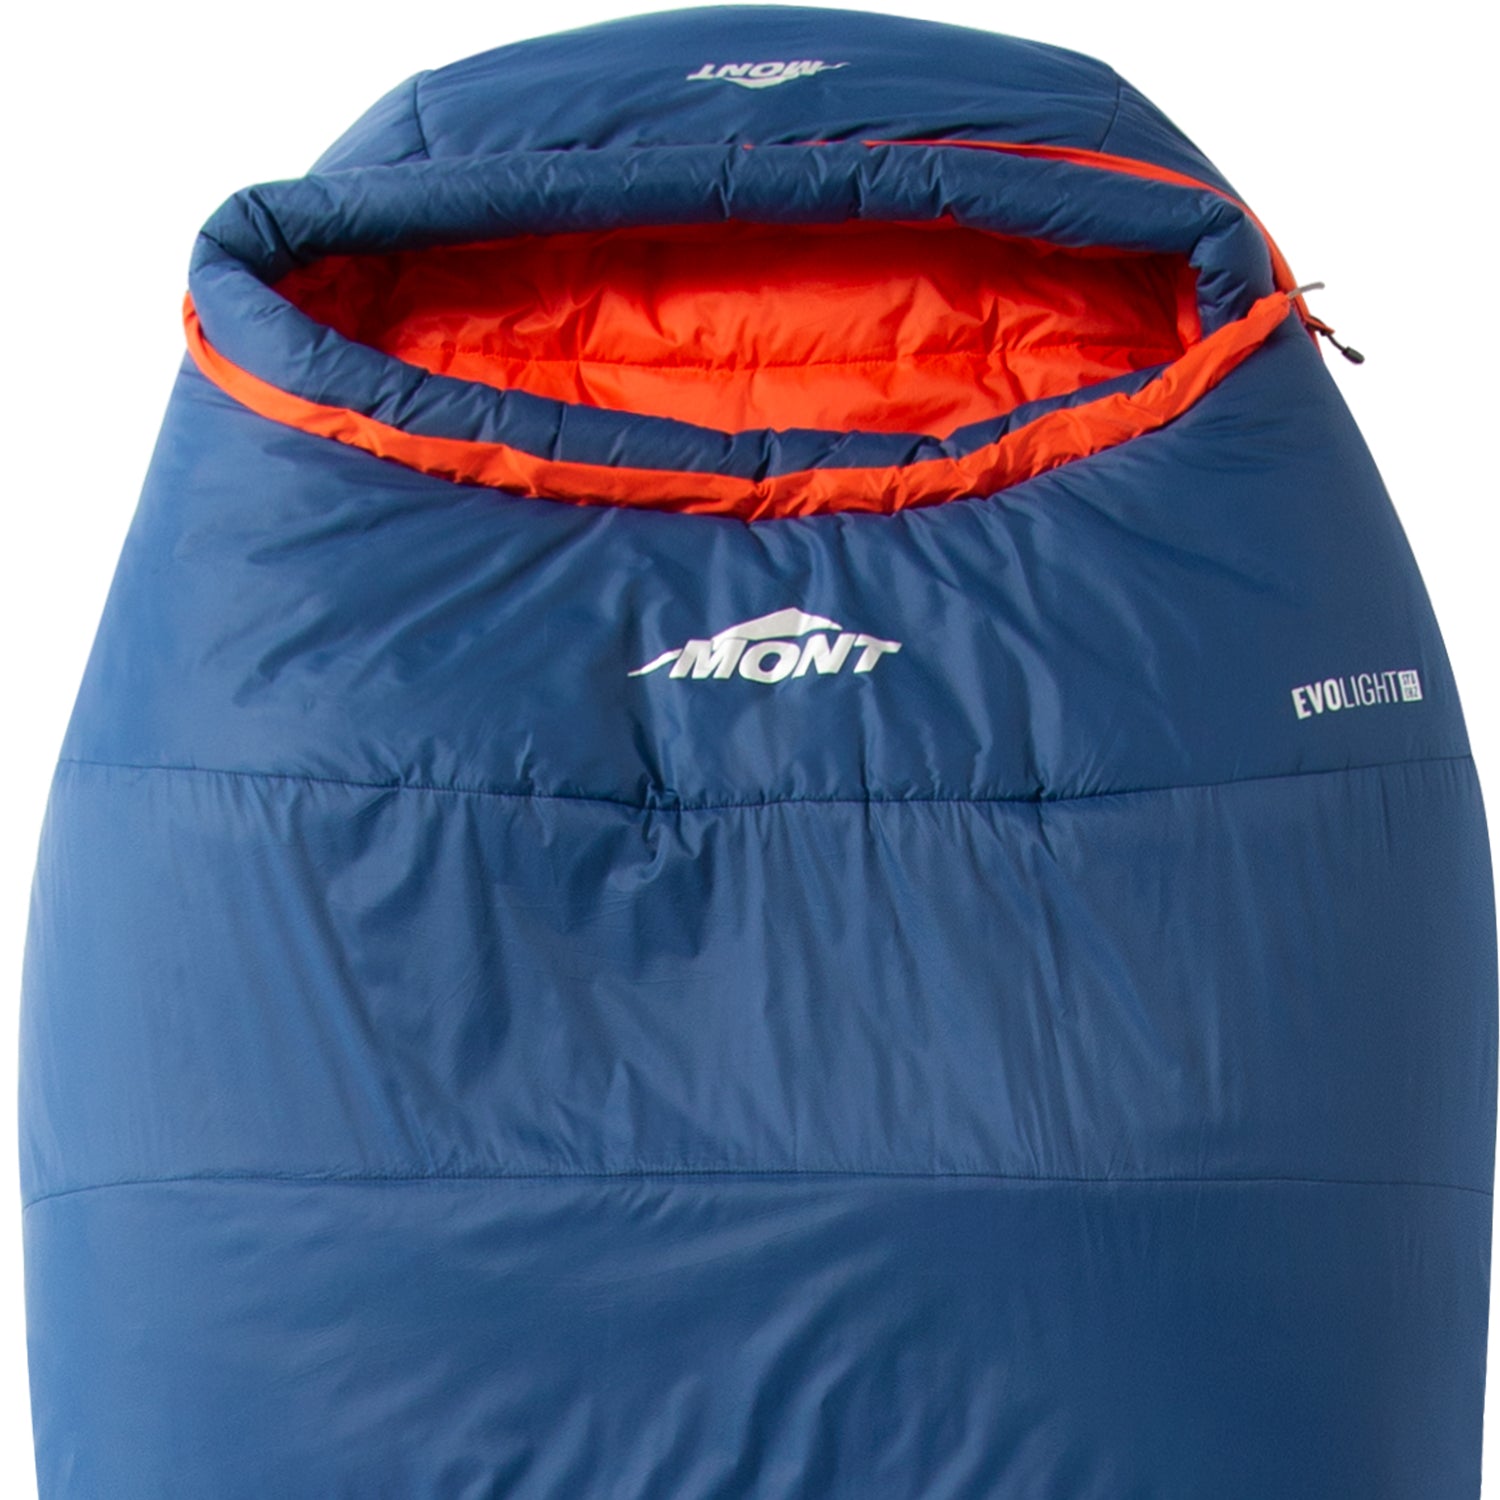 Sleeping Bag Temperature Ratings Explained | Switchback Travel